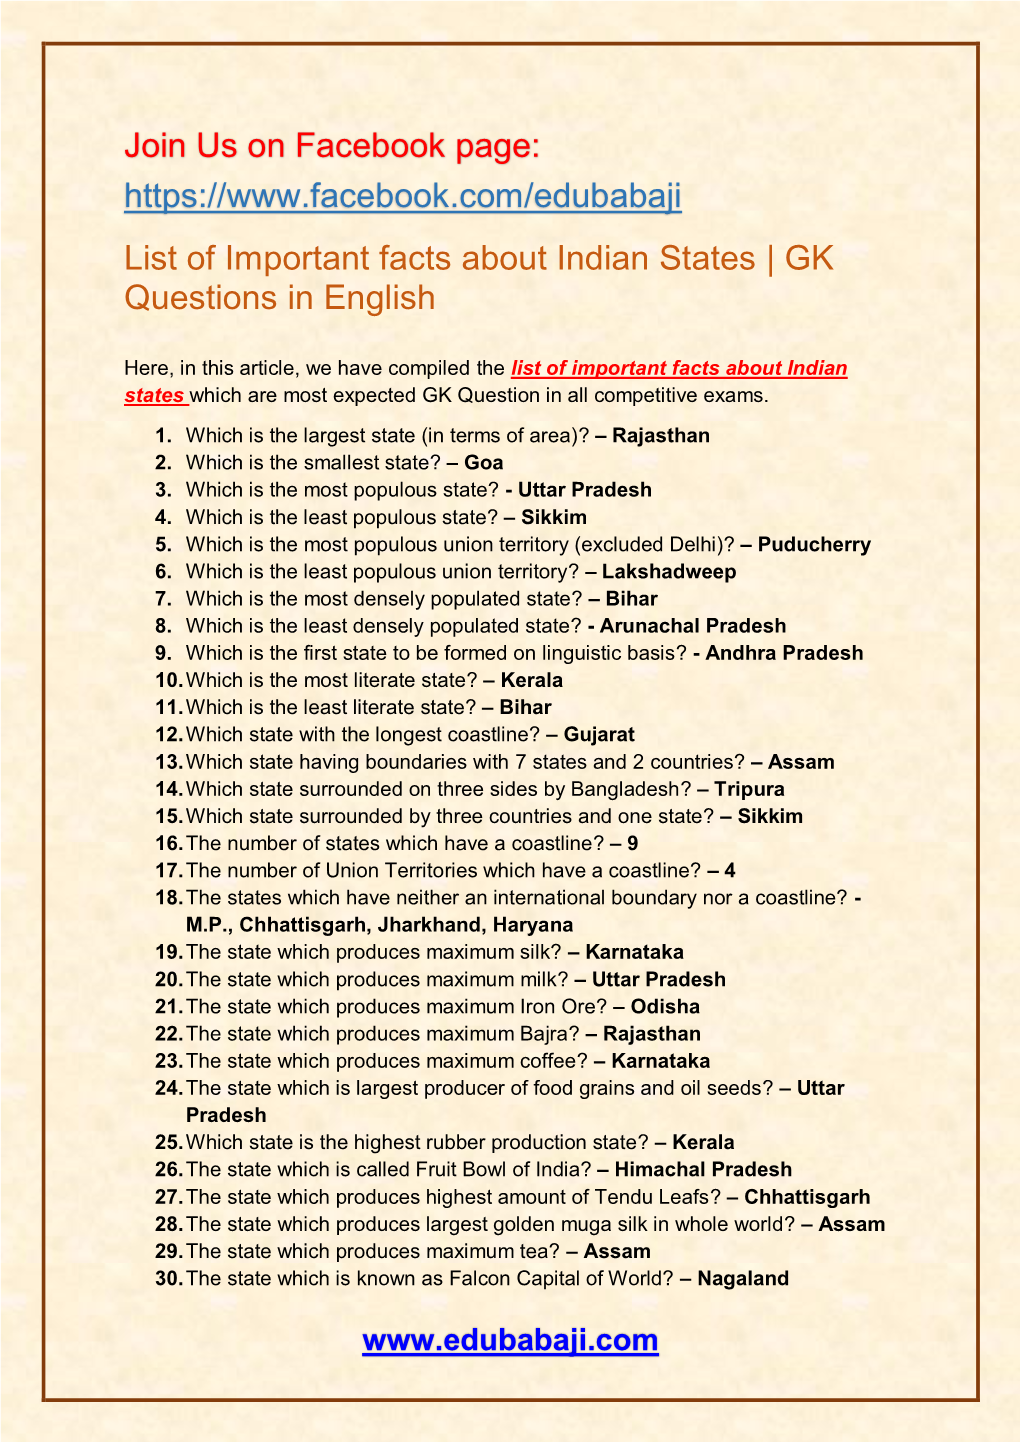 Join Us on Facebook Page: List of Important Facts About Indian States | GK Questions in English